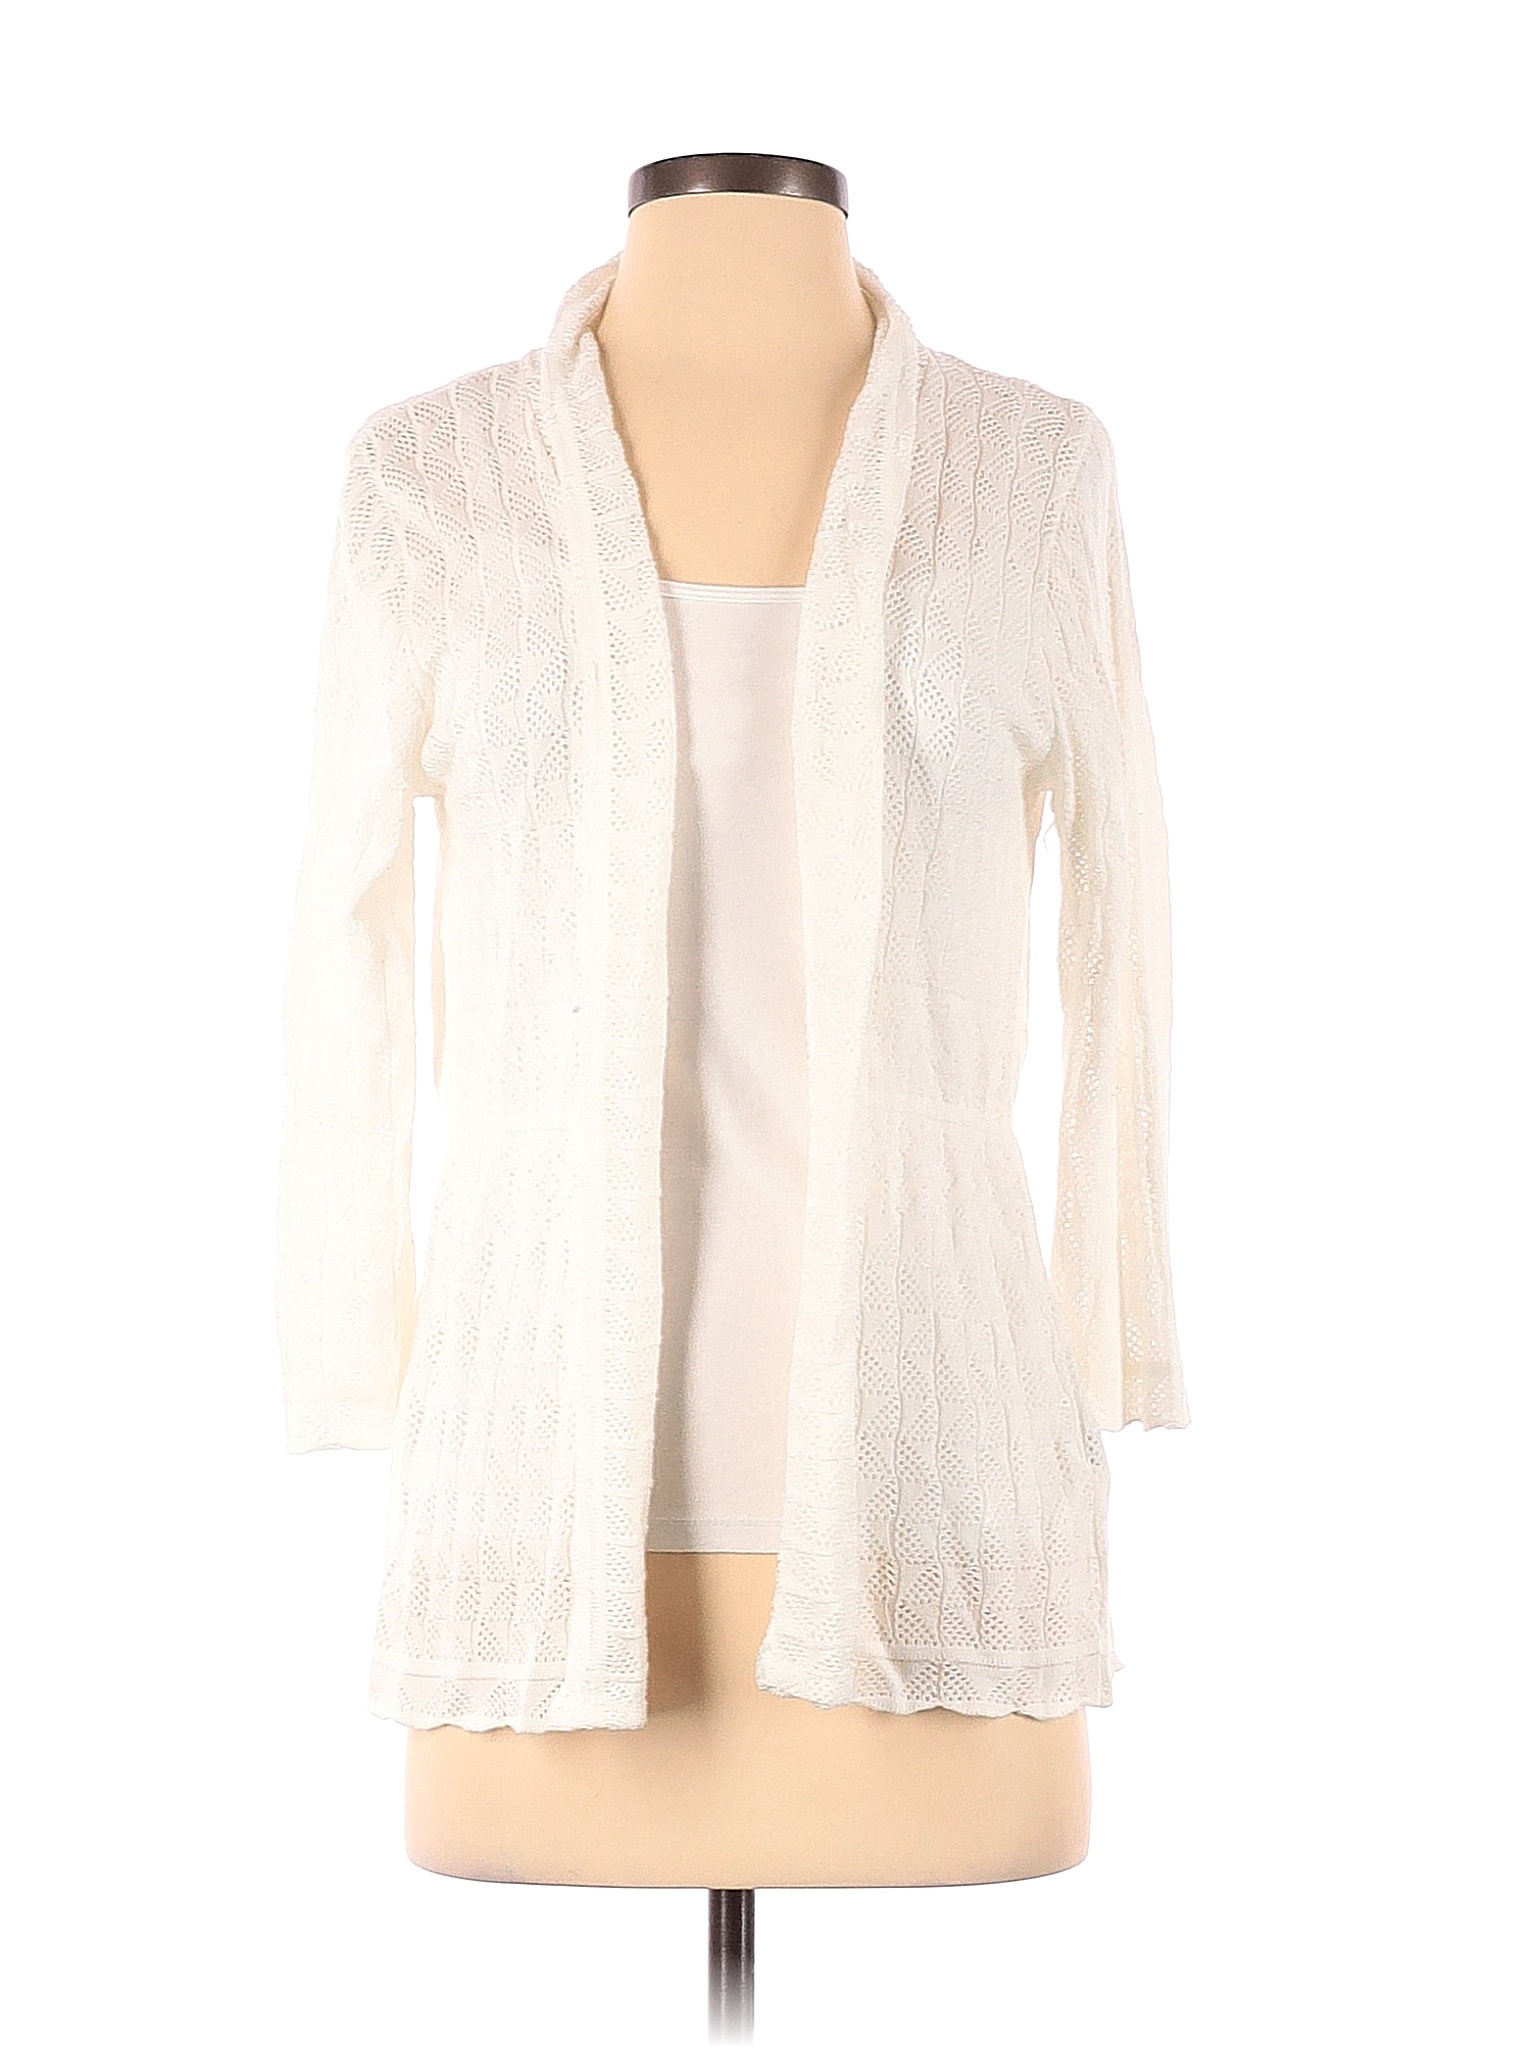 Notations 100% Acrylic Solid Ivory White Cardigan Size S - 62% off ...